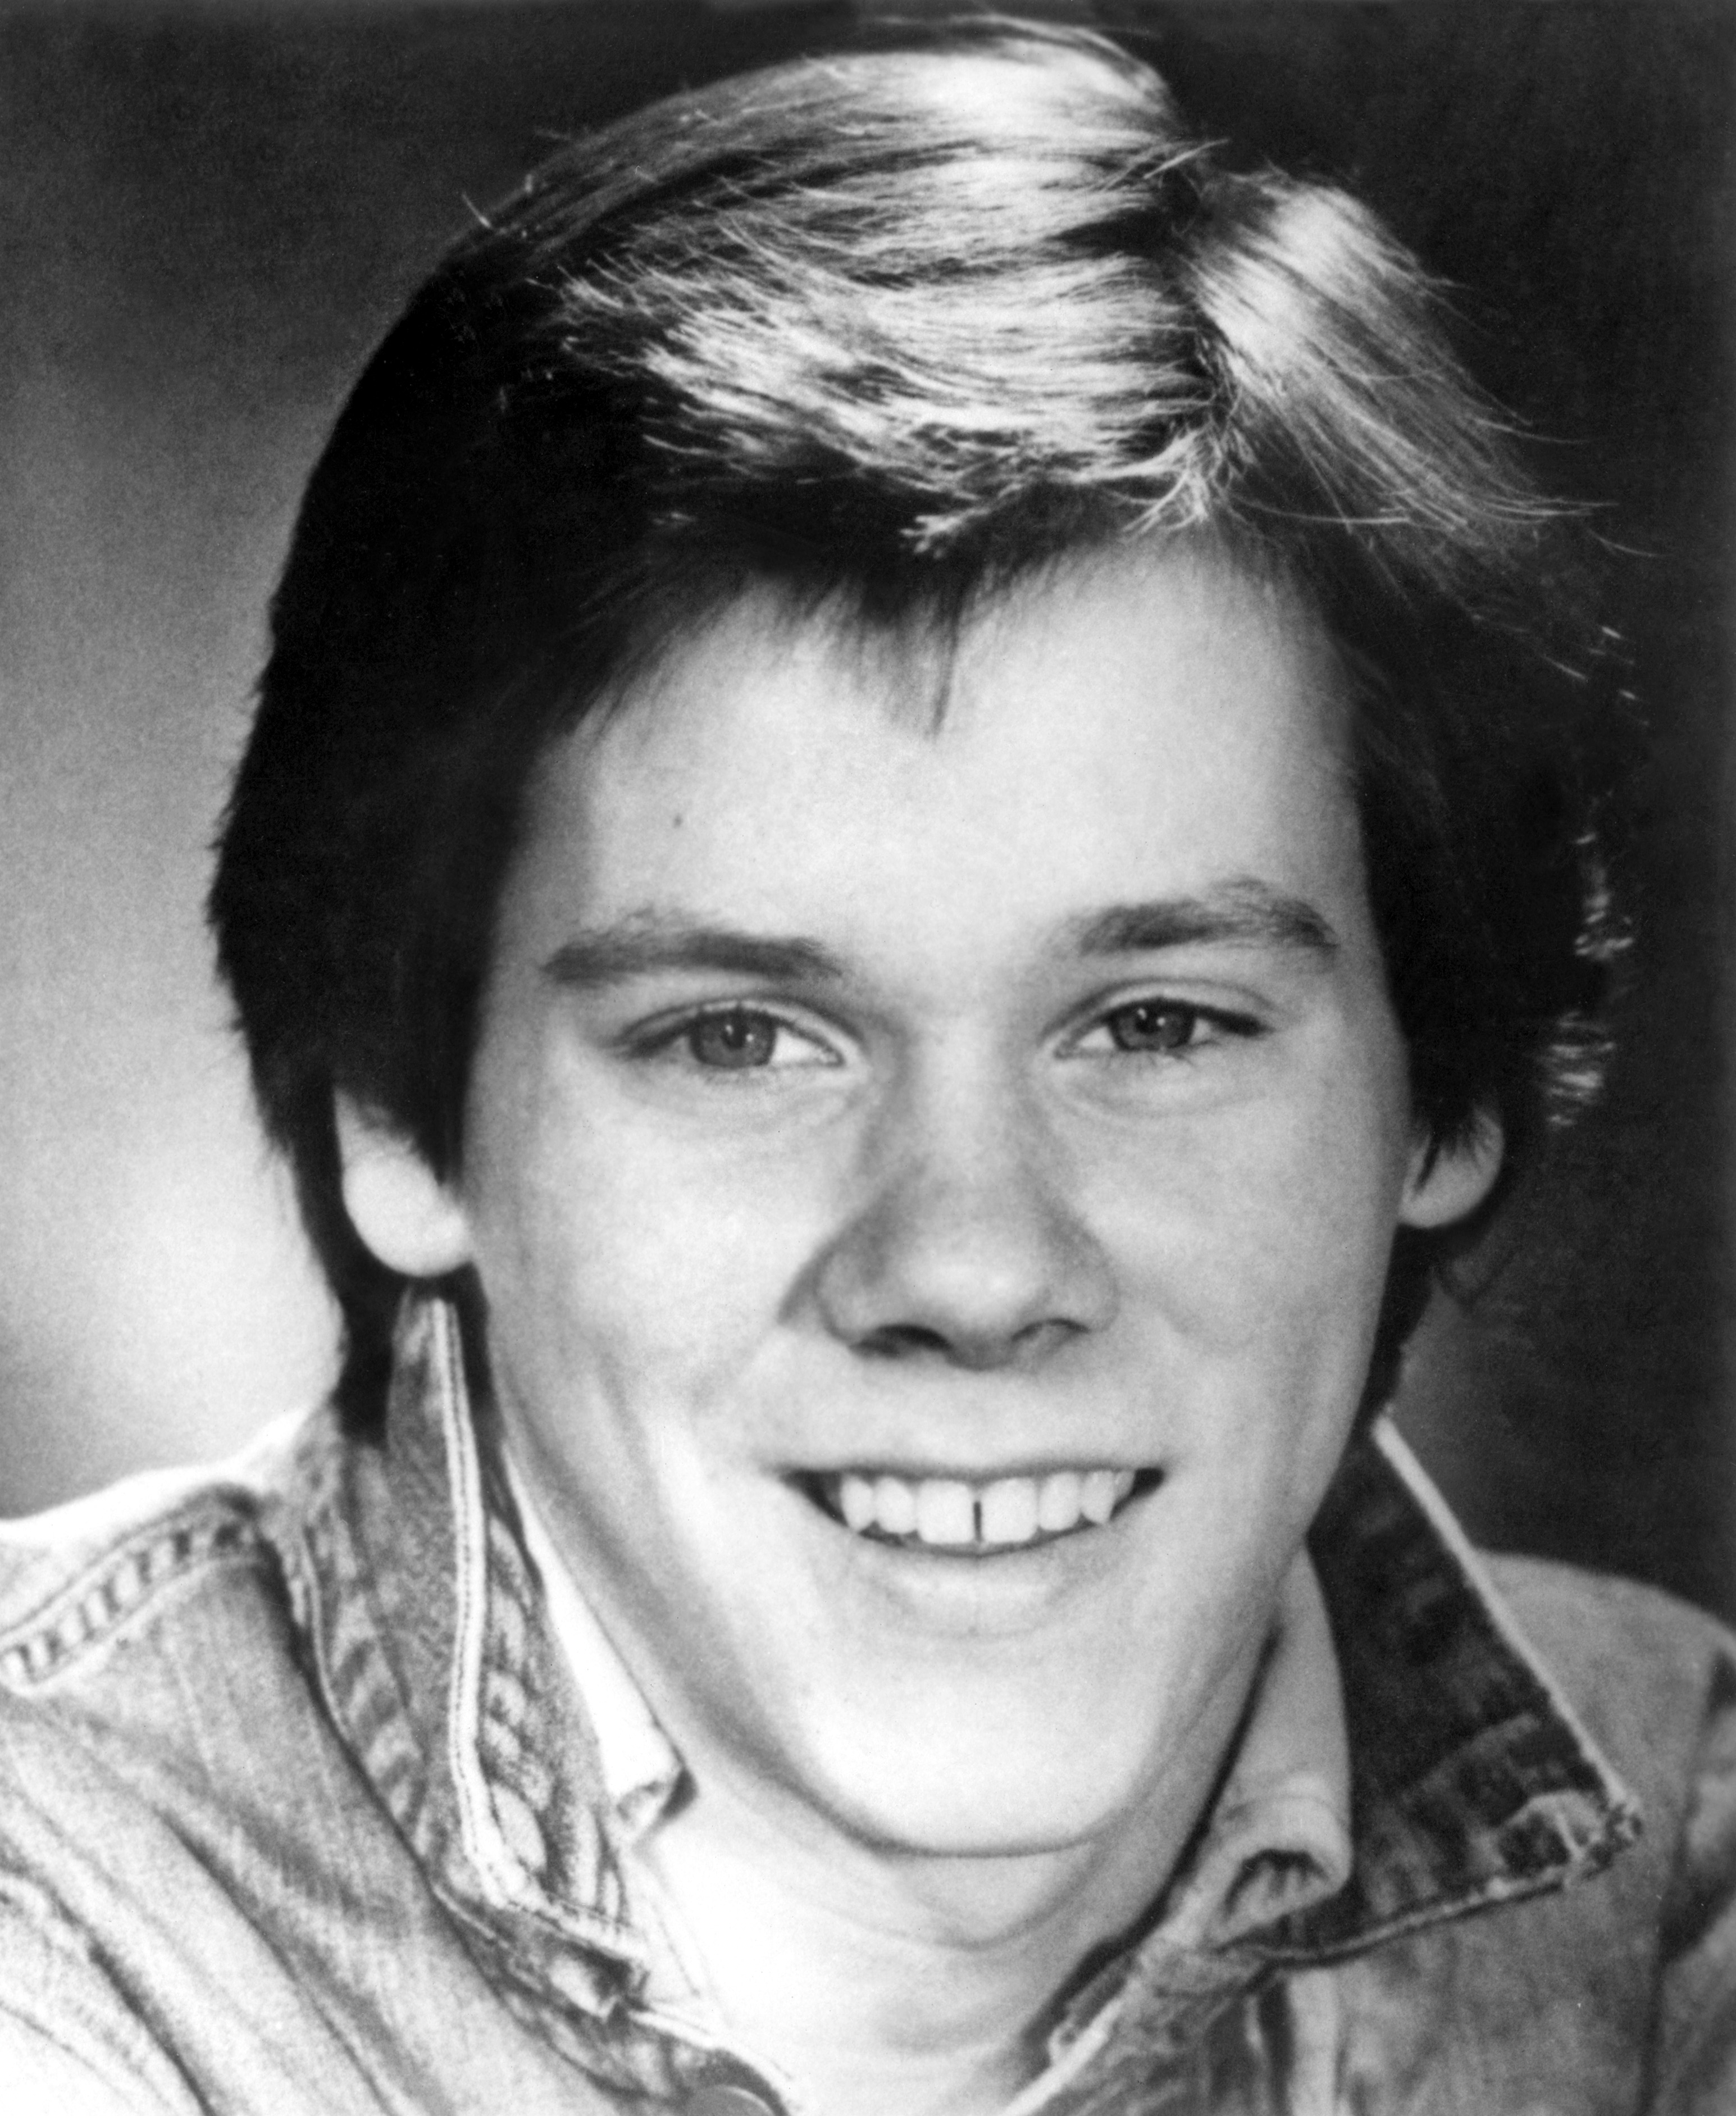 Young Kevin Bacon smiling with medium-length hair, wearing a casual collared shirt and denim jacket